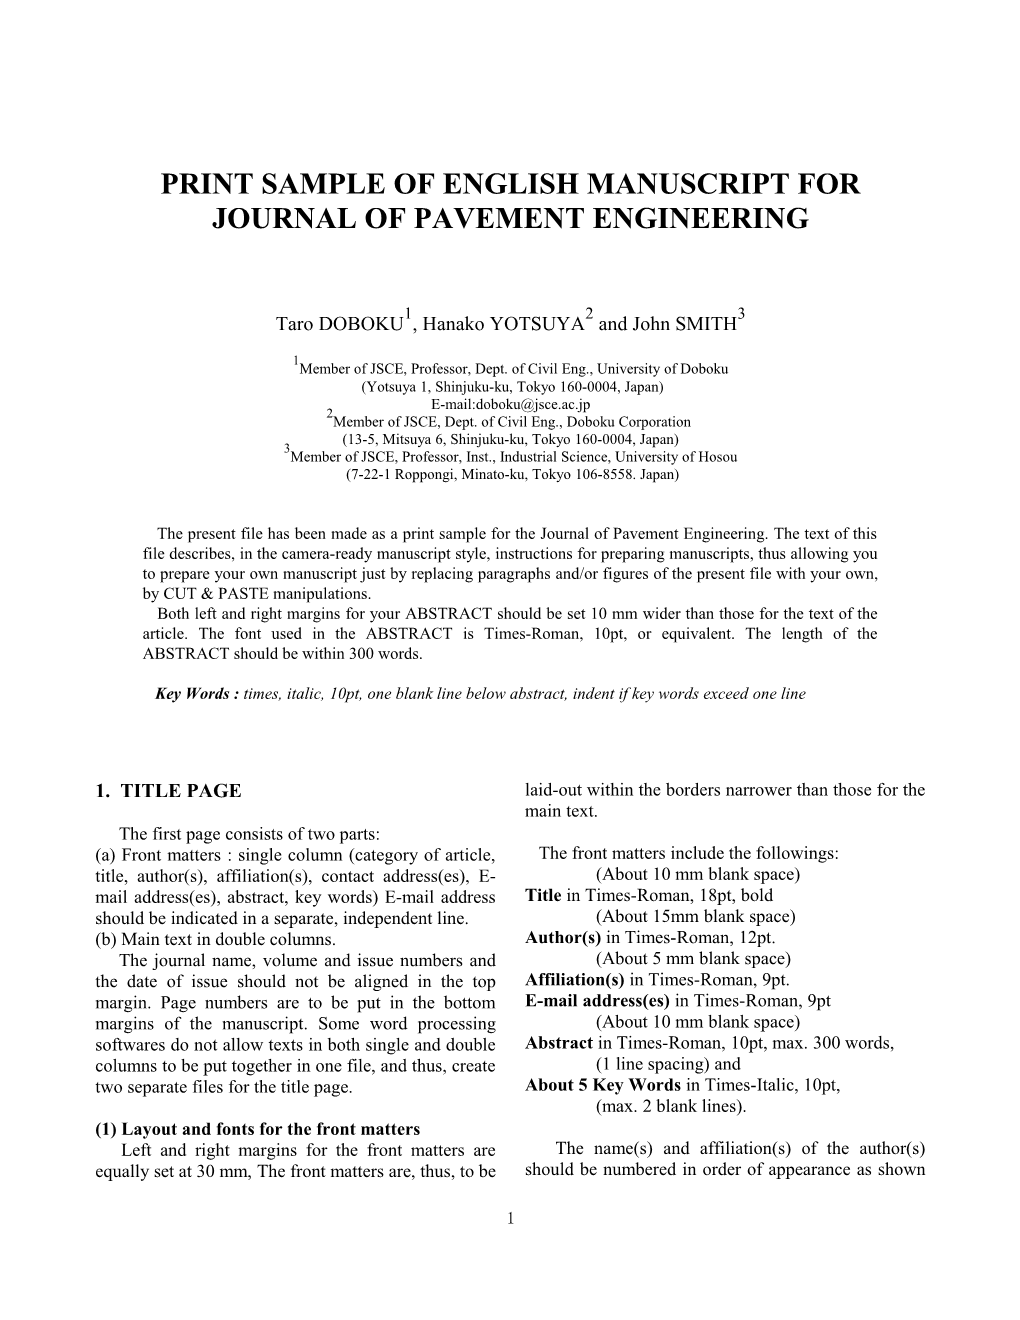 Print Sample of English Manuscript for Journal of Pavement Engineering